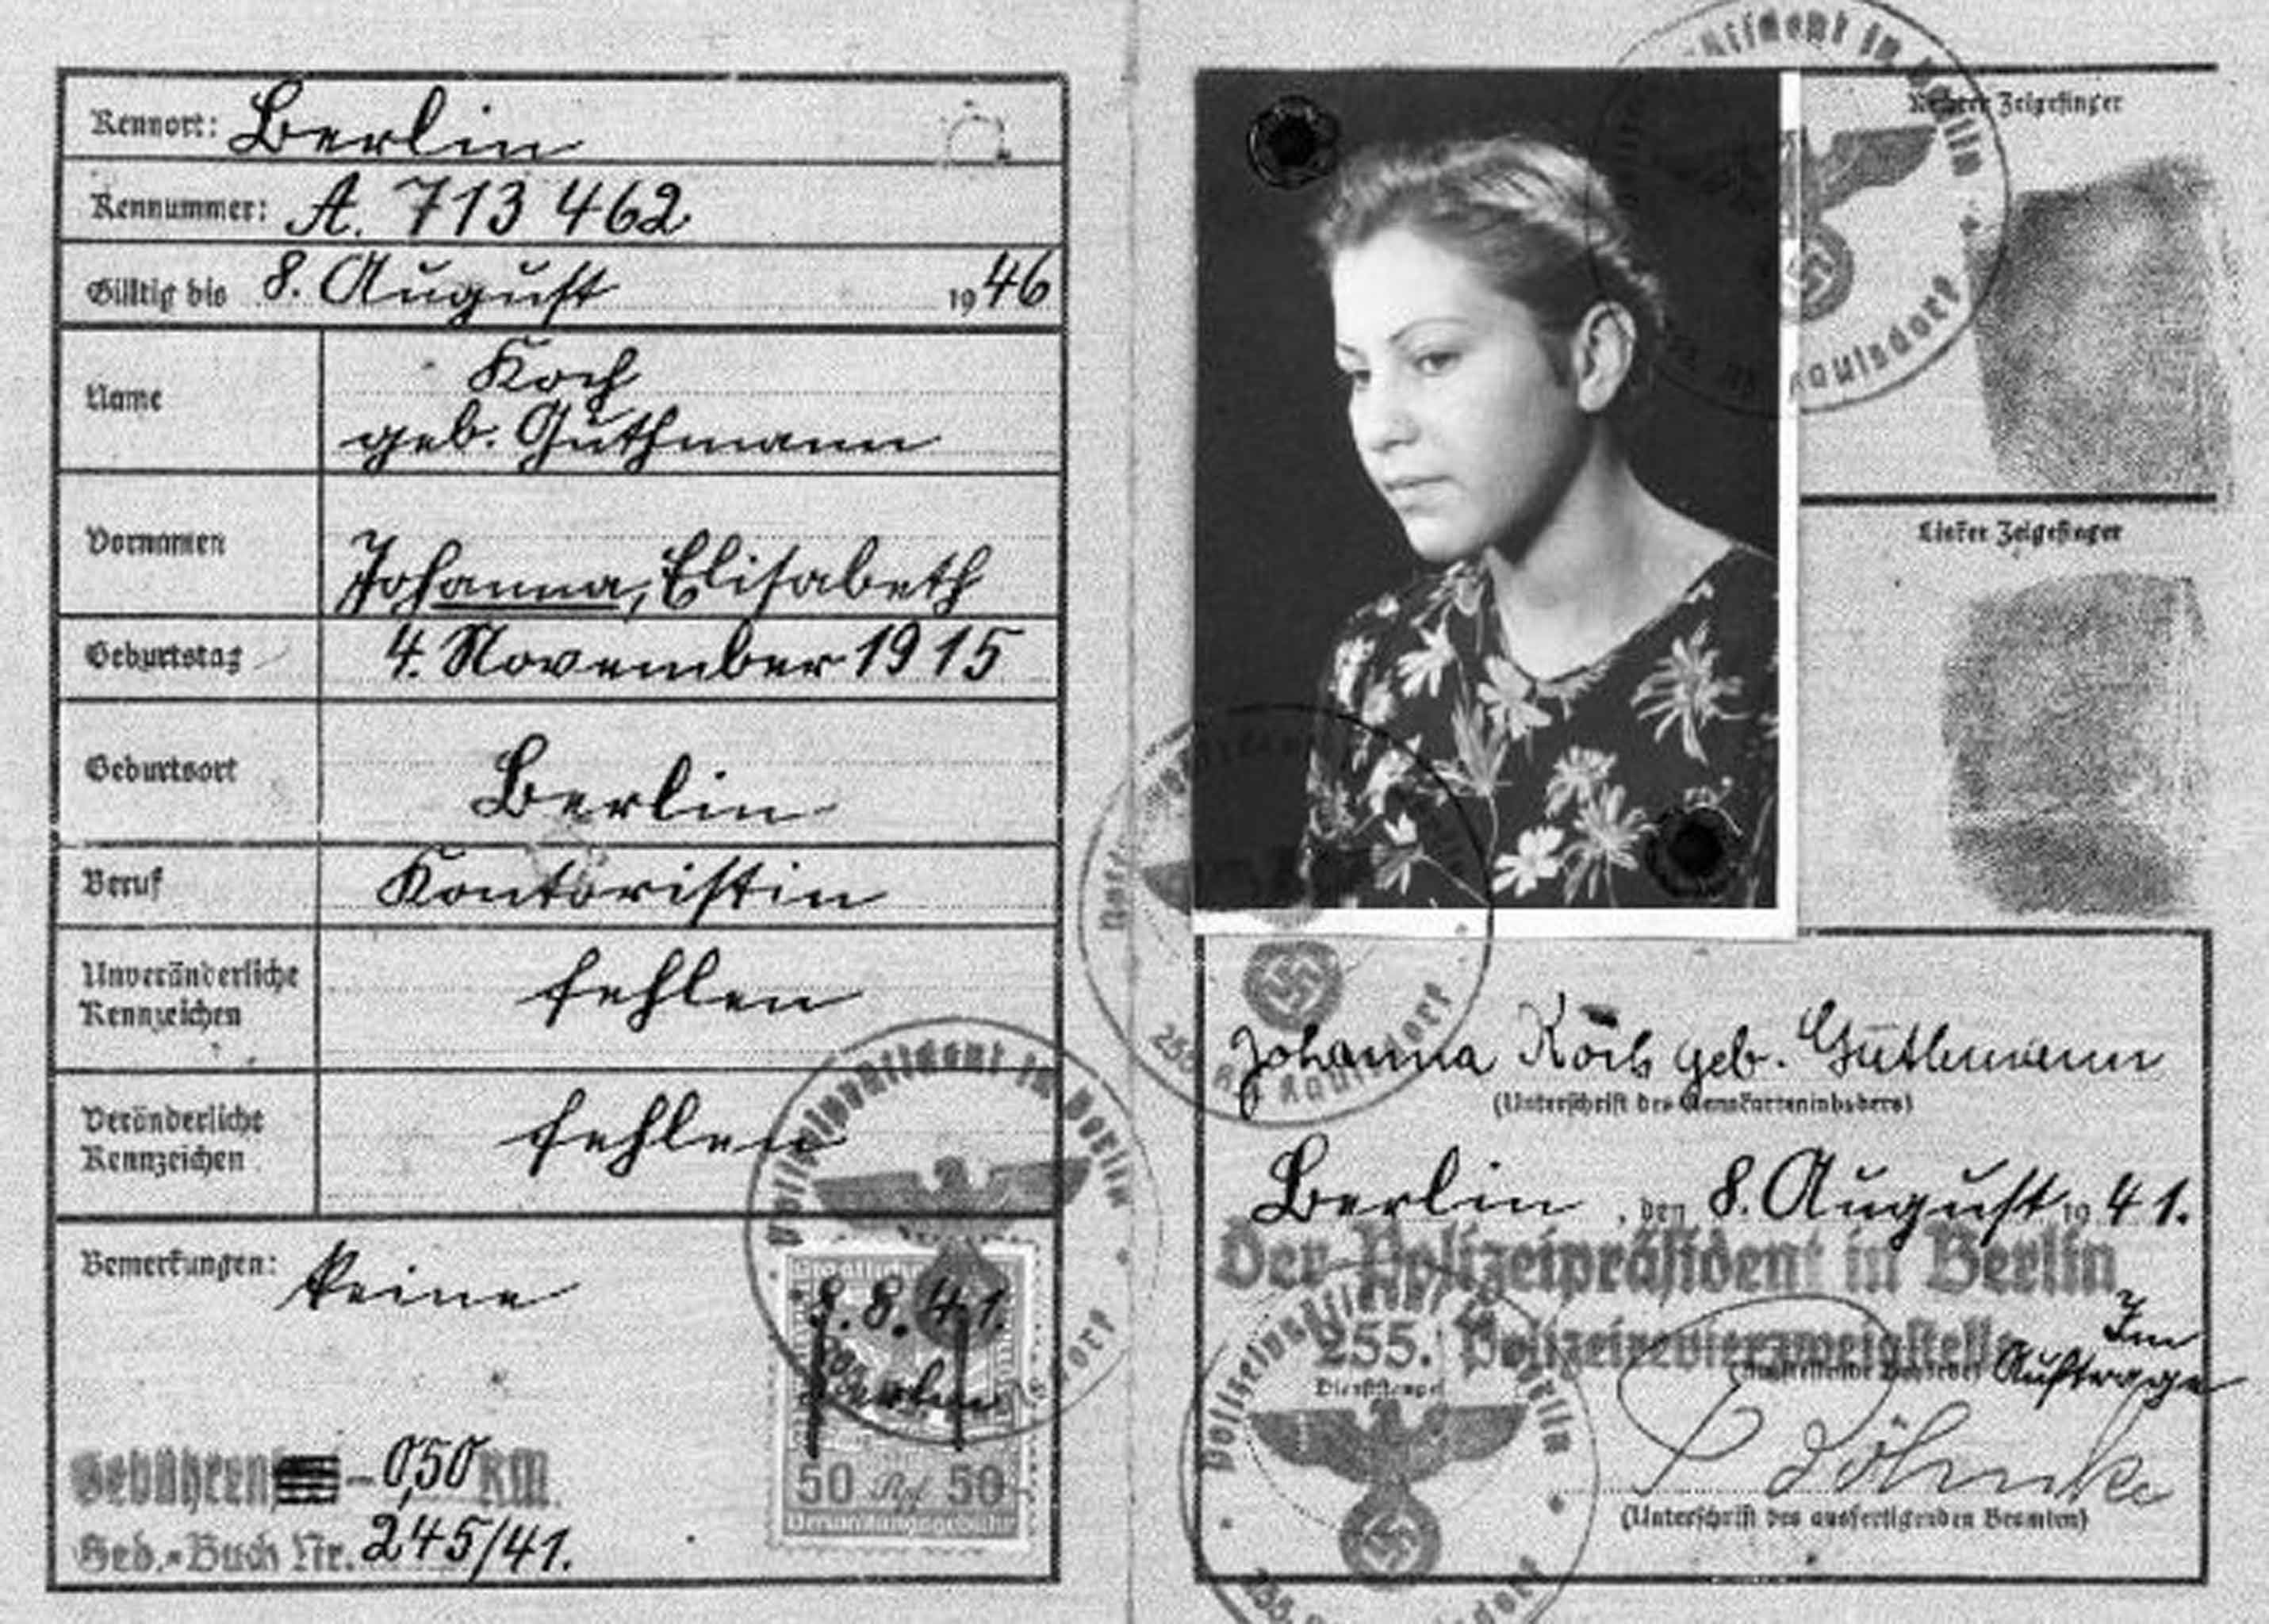 Marie had fake ID, in the name of Johanna Koch, after she evaded capture by the Nazis in wartime Berlin